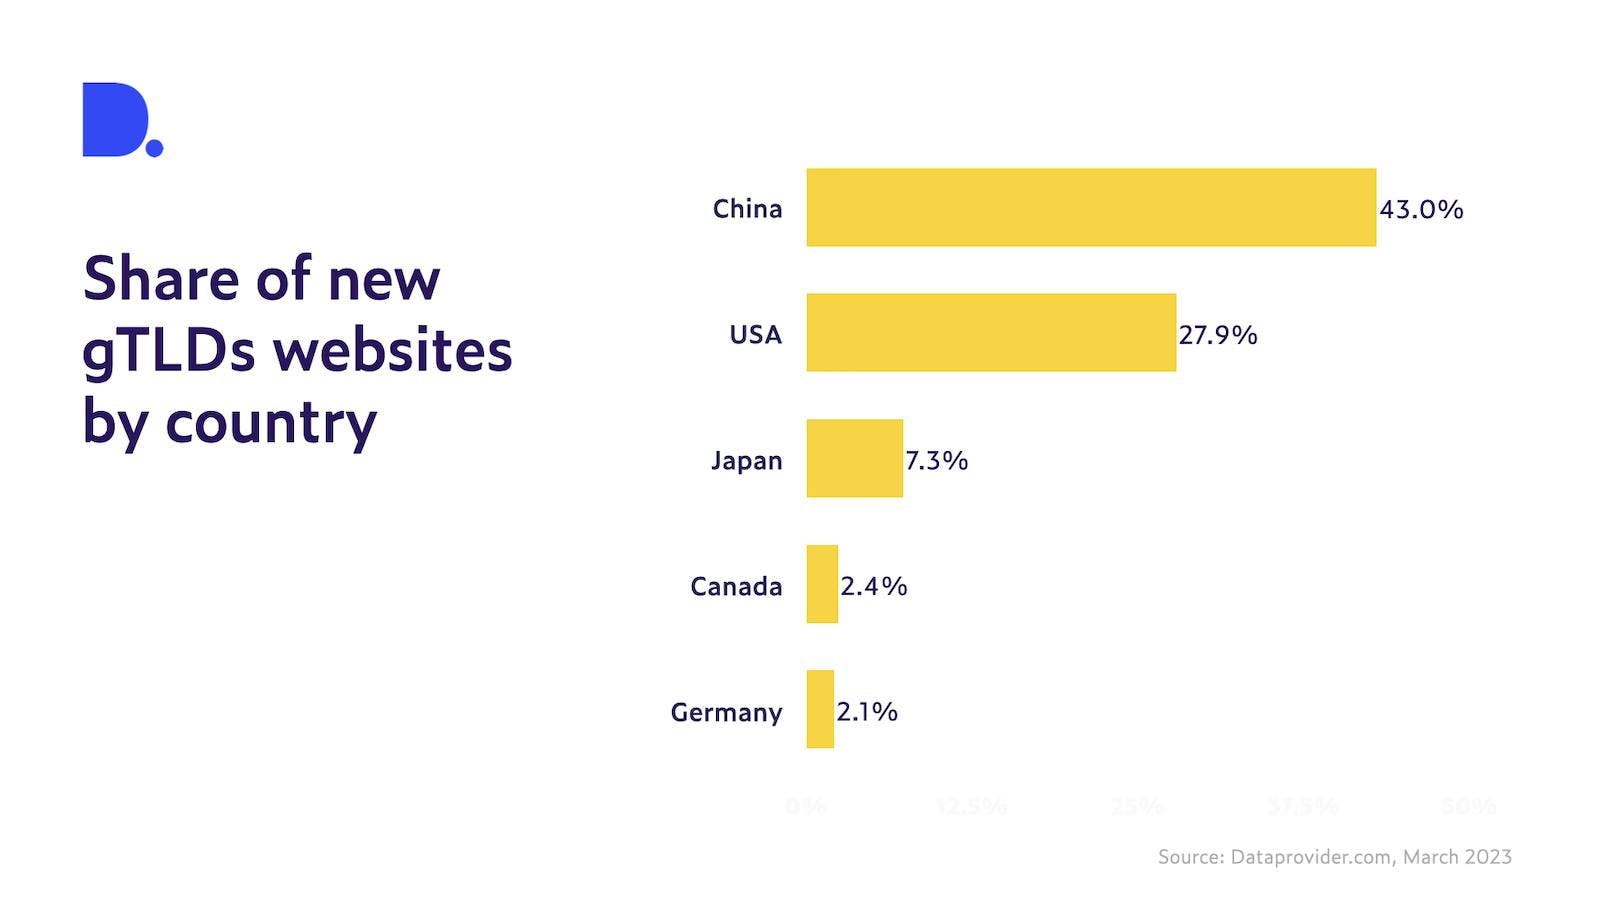 Most popular new gTLDs by country